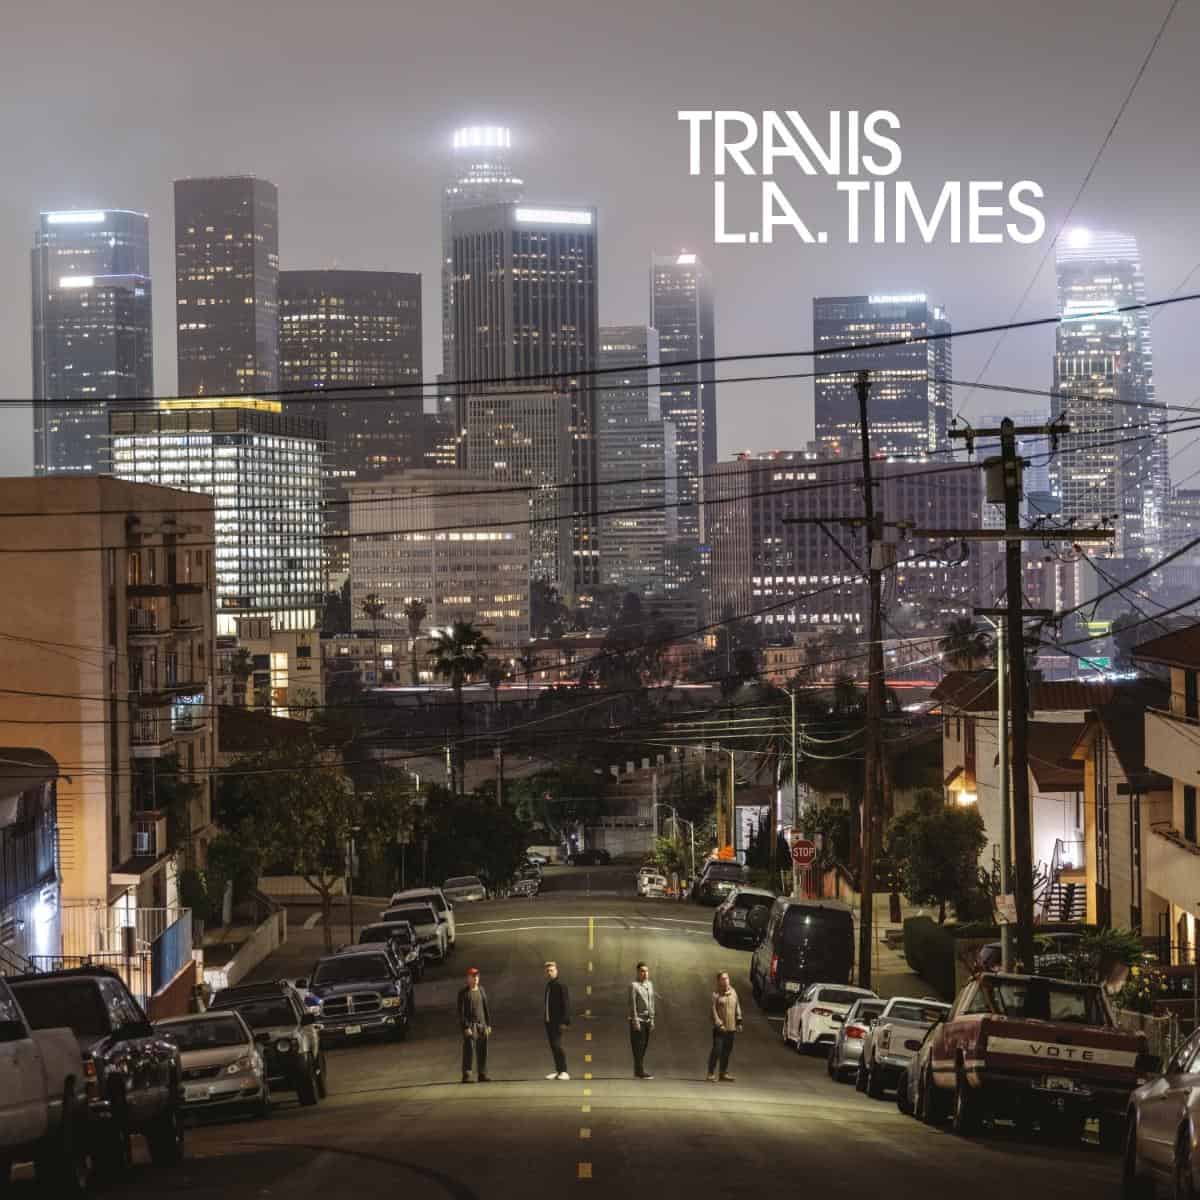 Travis, L.A. Times (Deluxe Edition), CD